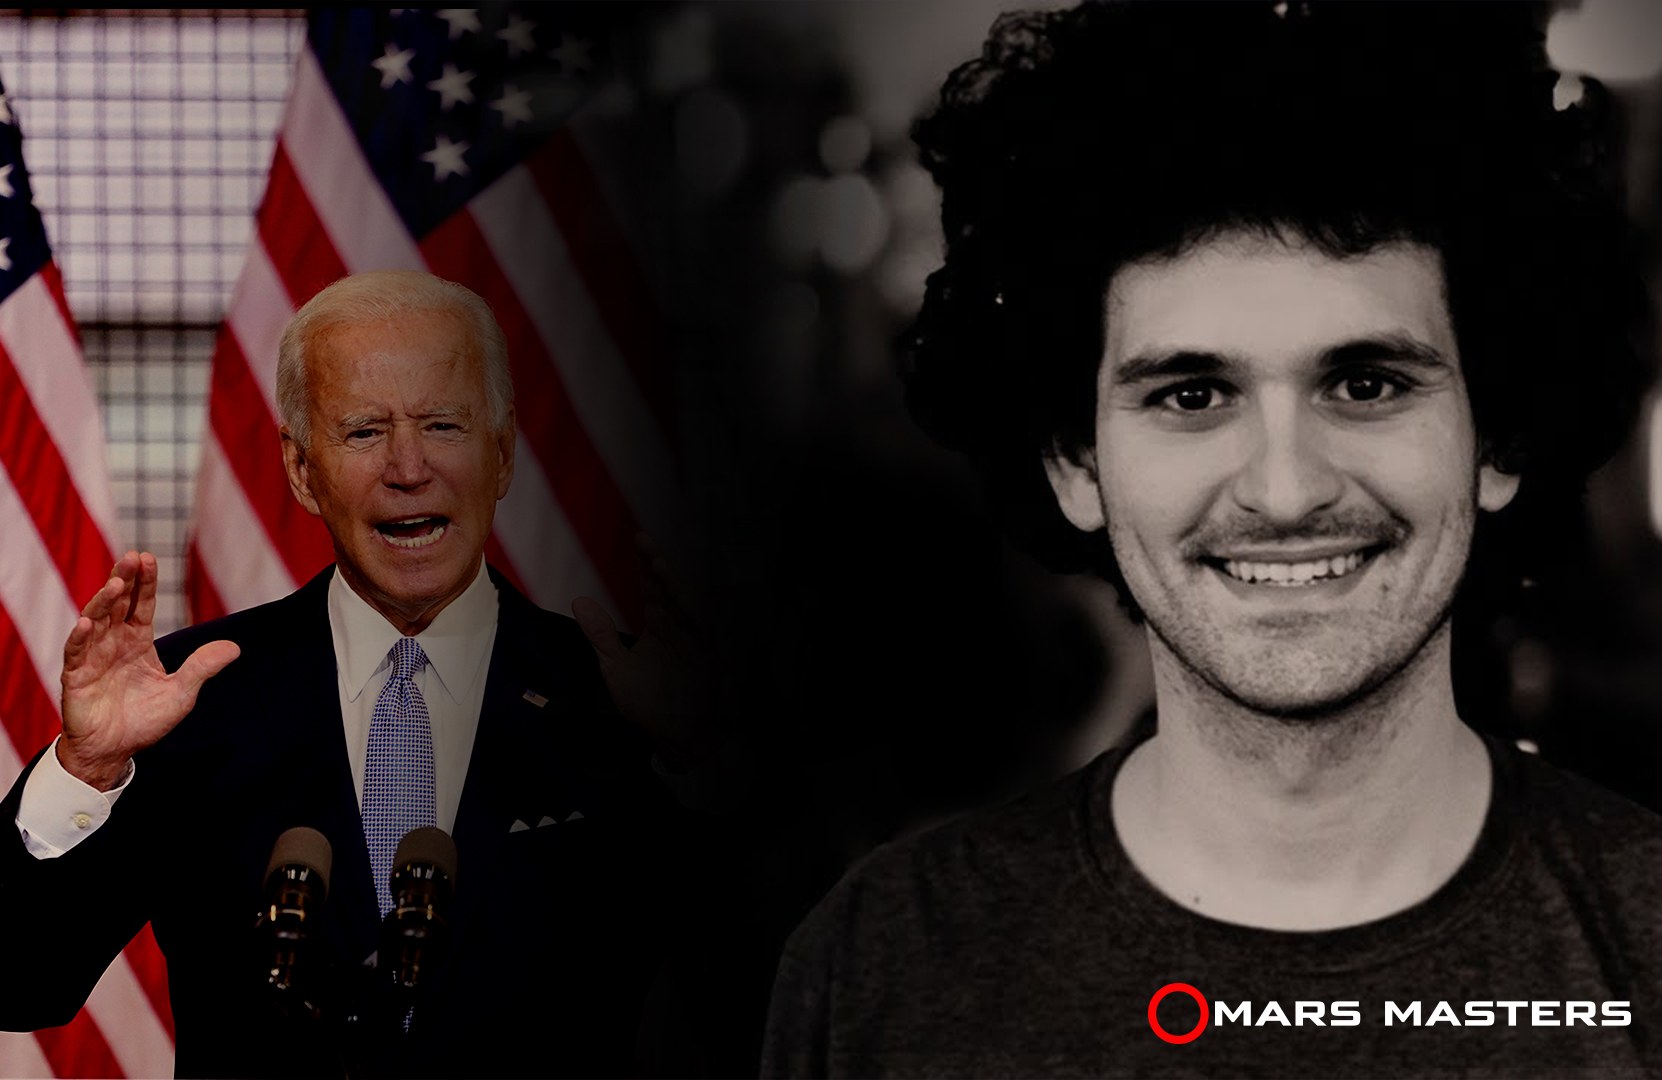 CEO of Hong Kong-based crypto exchange FTX donated Biden campaign